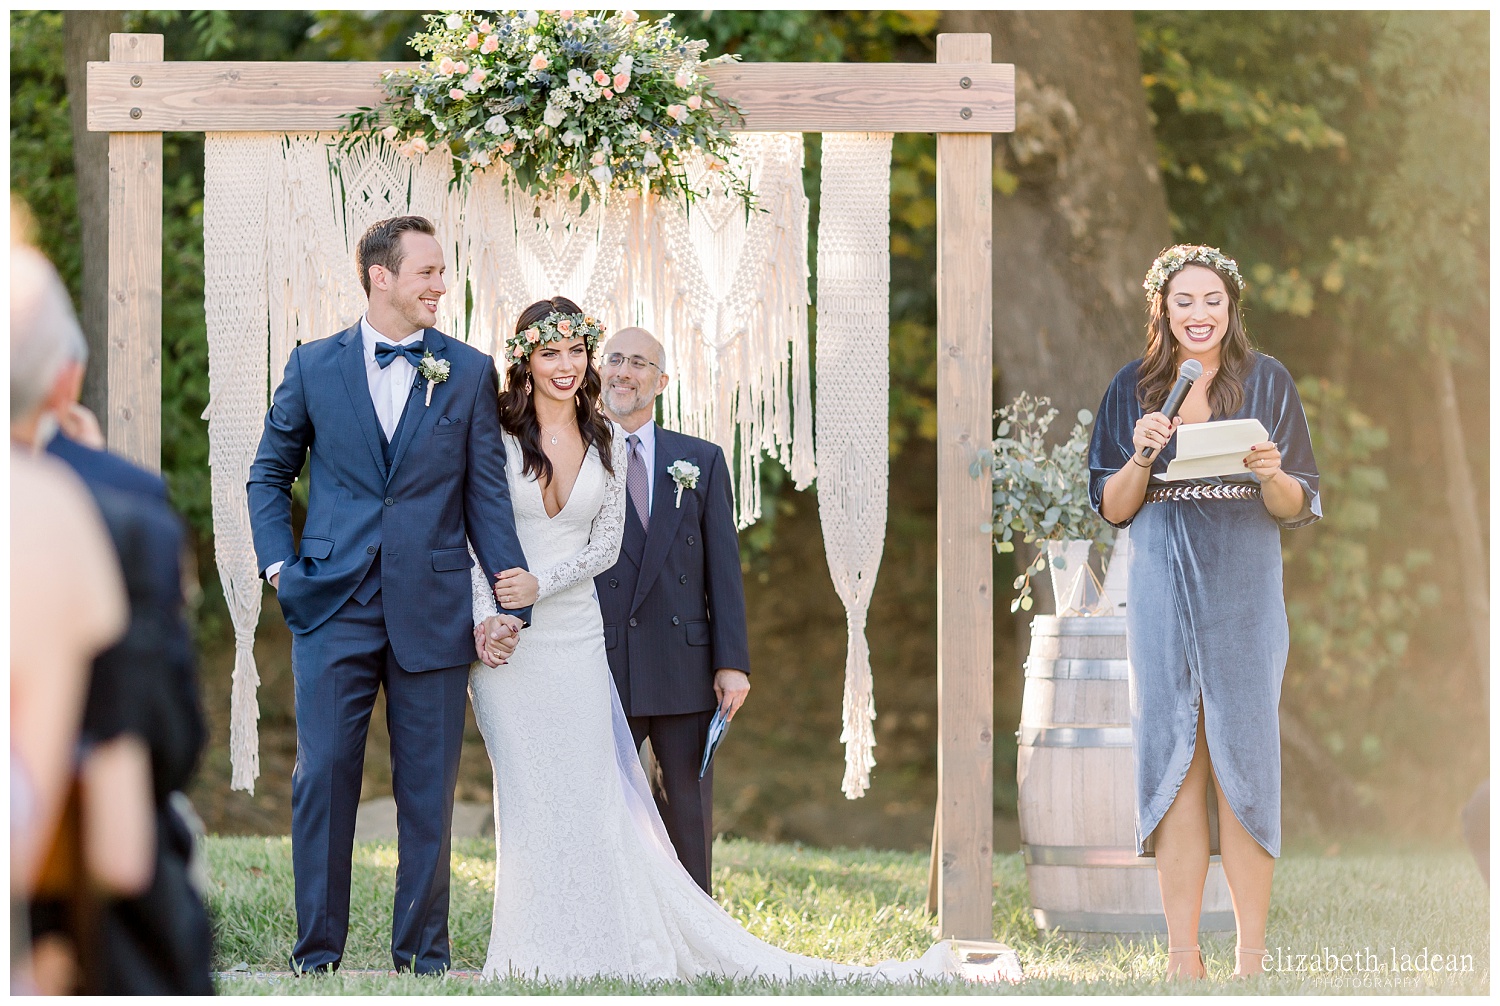 Willow-Creek-Blush-and-Blues-Outdoor-Wedding-Photography-S+Z2018-elizabeth-ladean-photography-photo_0576.jpg